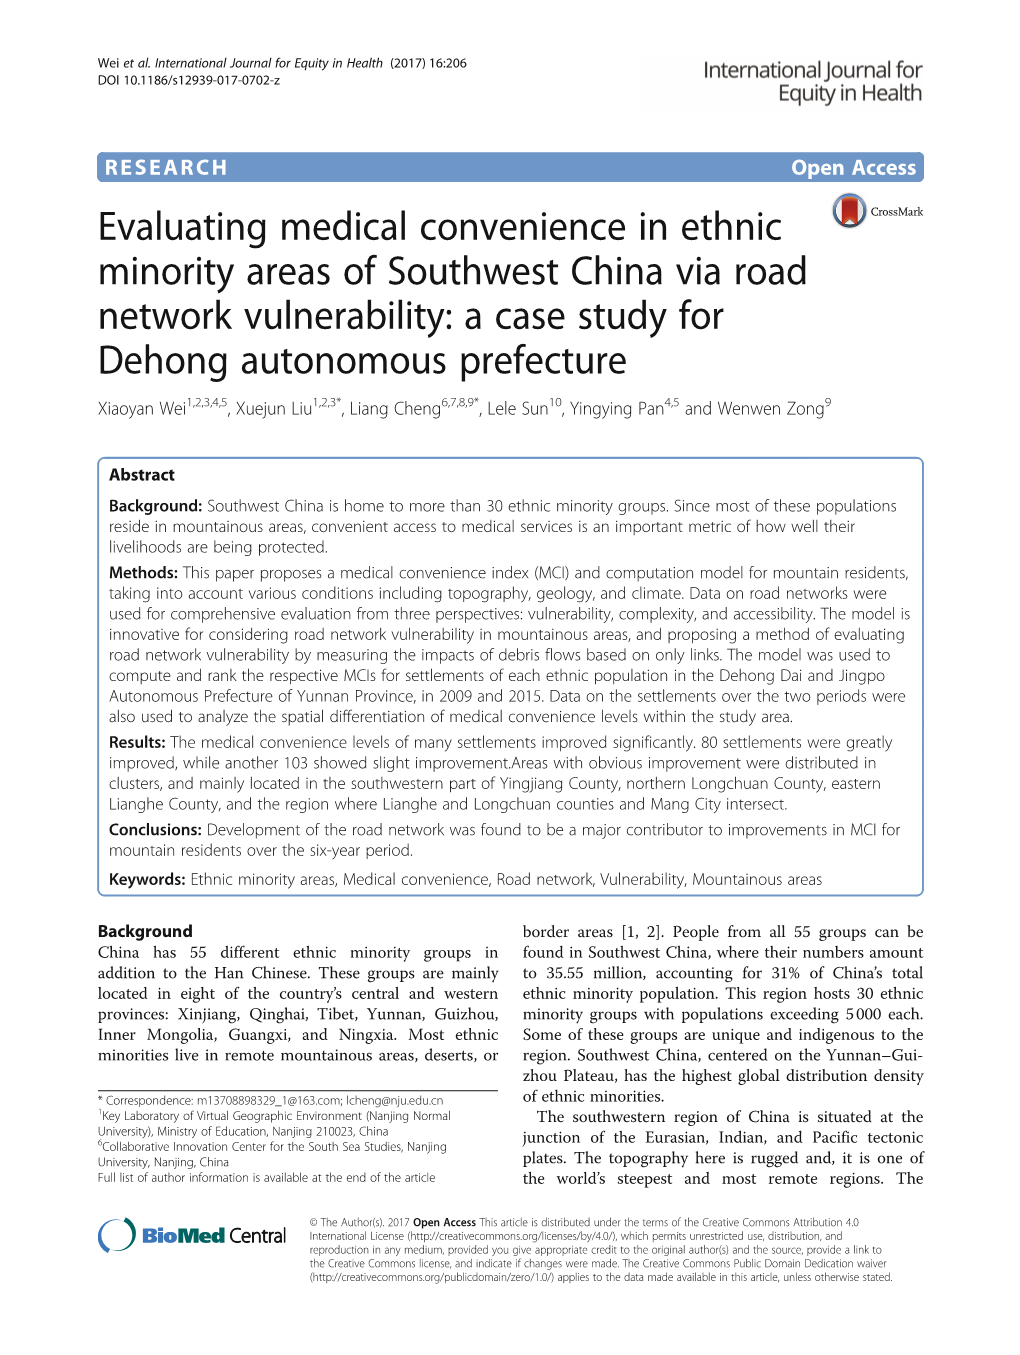 Evaluating Medical Convenience in Ethnic Minority Areas of Southwest China Via Road Network Vulnerability: a Case Study for Deho